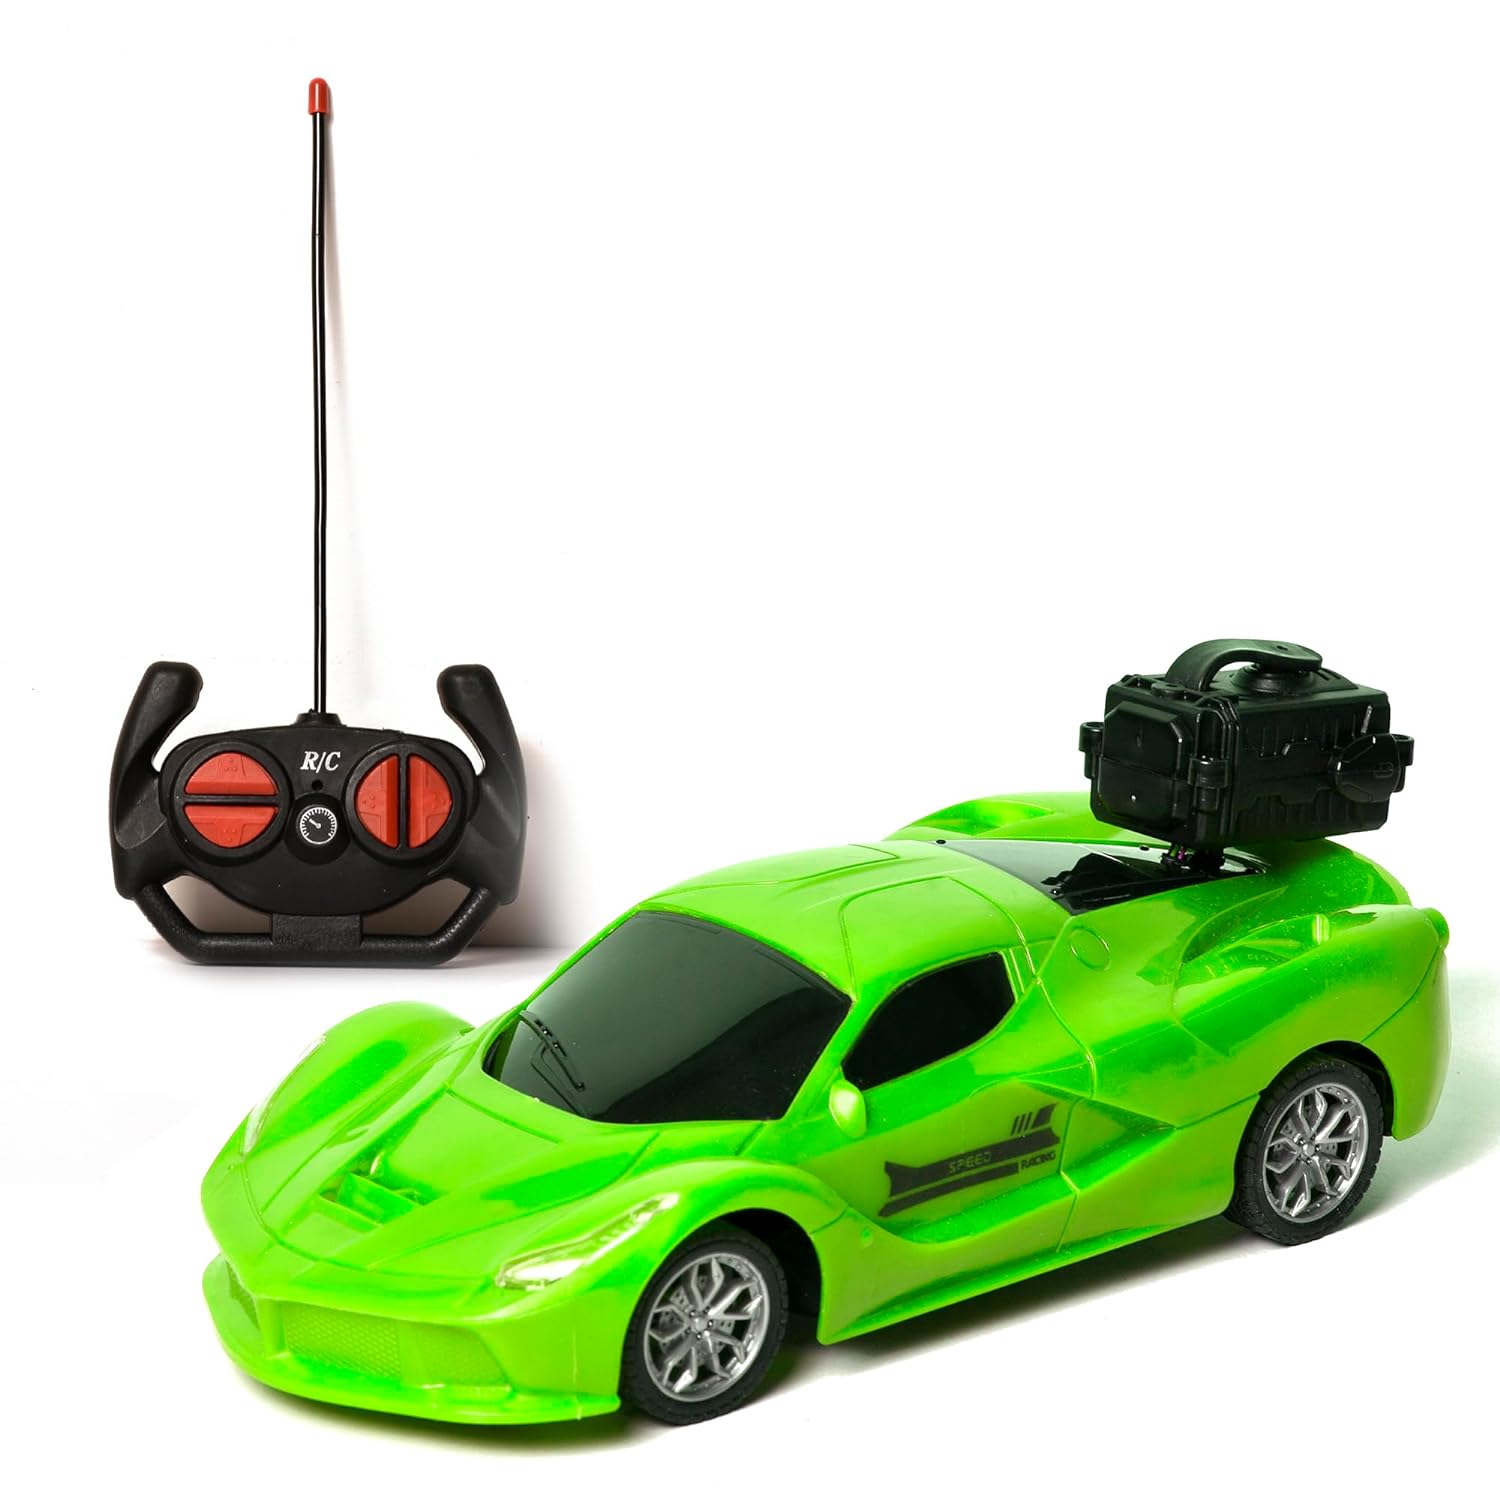 Braintastic Model Diecast Car Toy Vehicle Pull Back Friction Car with Openable Doors Light & Music Toys for Kids Age 3+ Years (Spray Car Green)